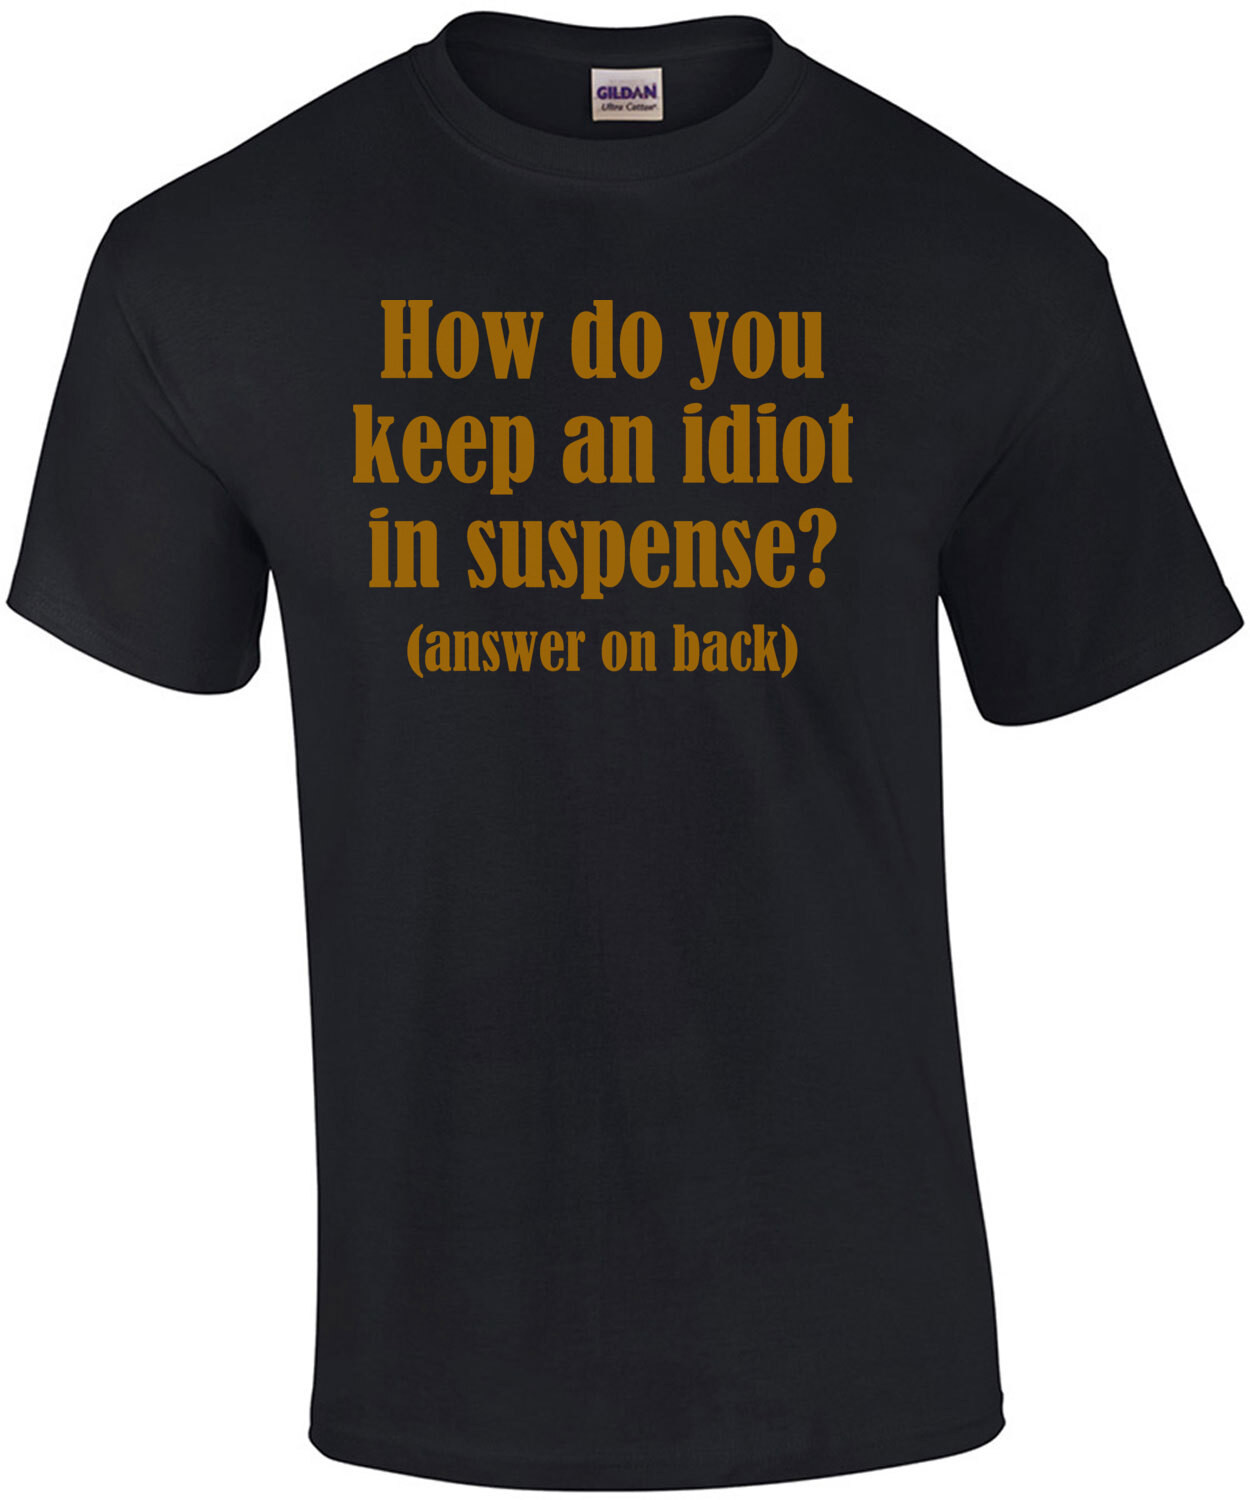 How do you keep an idiot in suspense? (answer on back)... 